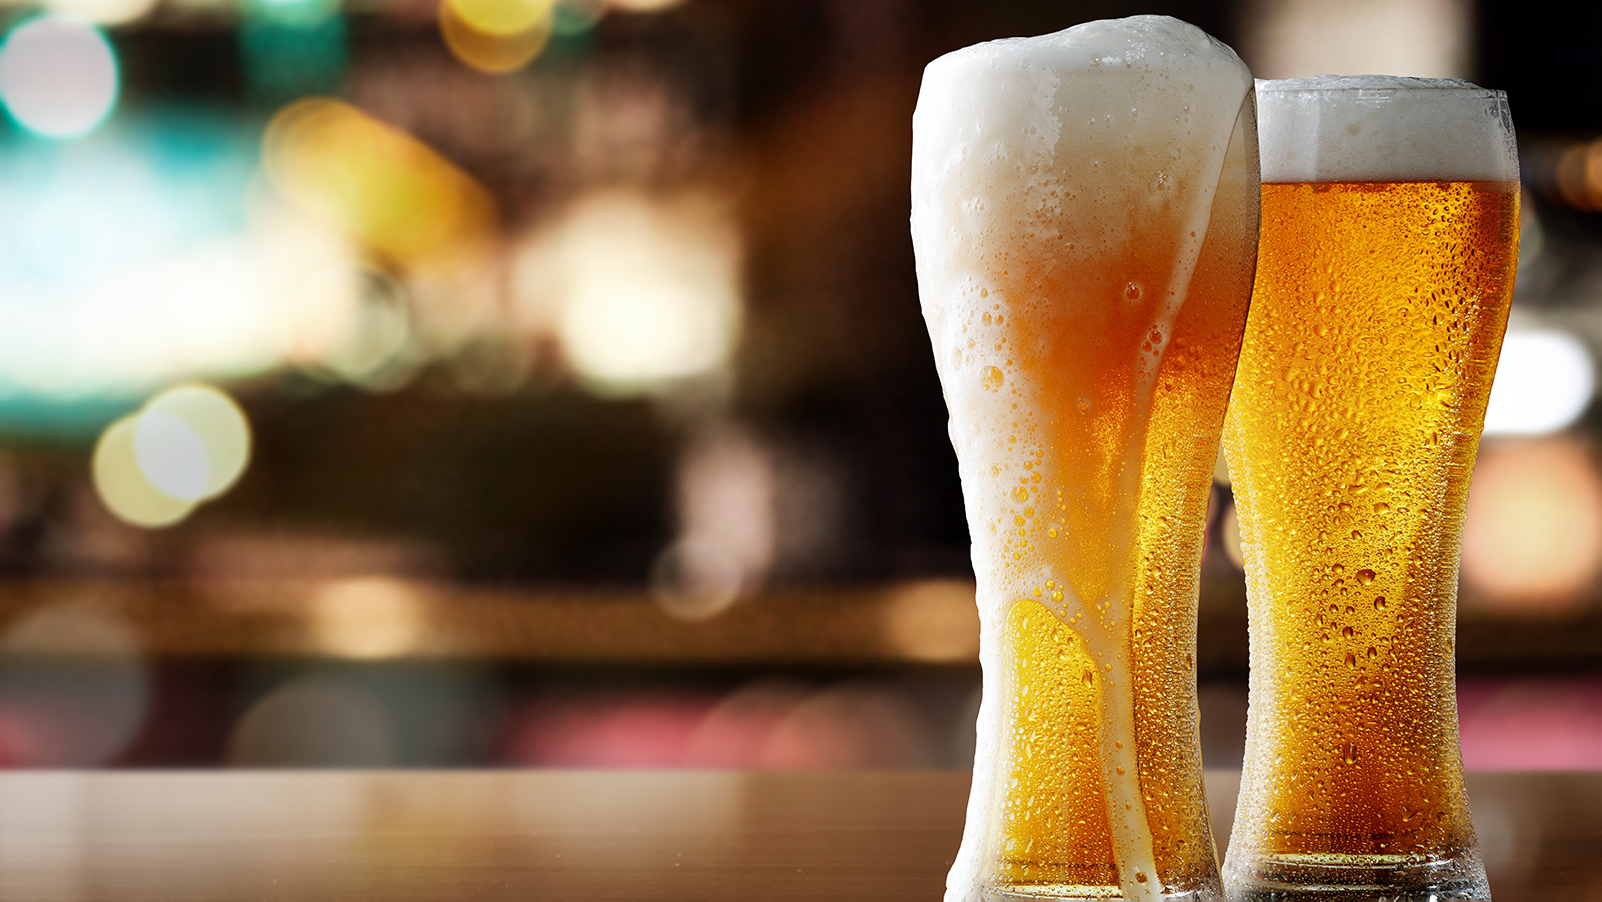 National Beer Day: 6 Vegan-Friendly Alcohol Brands You Should Know About